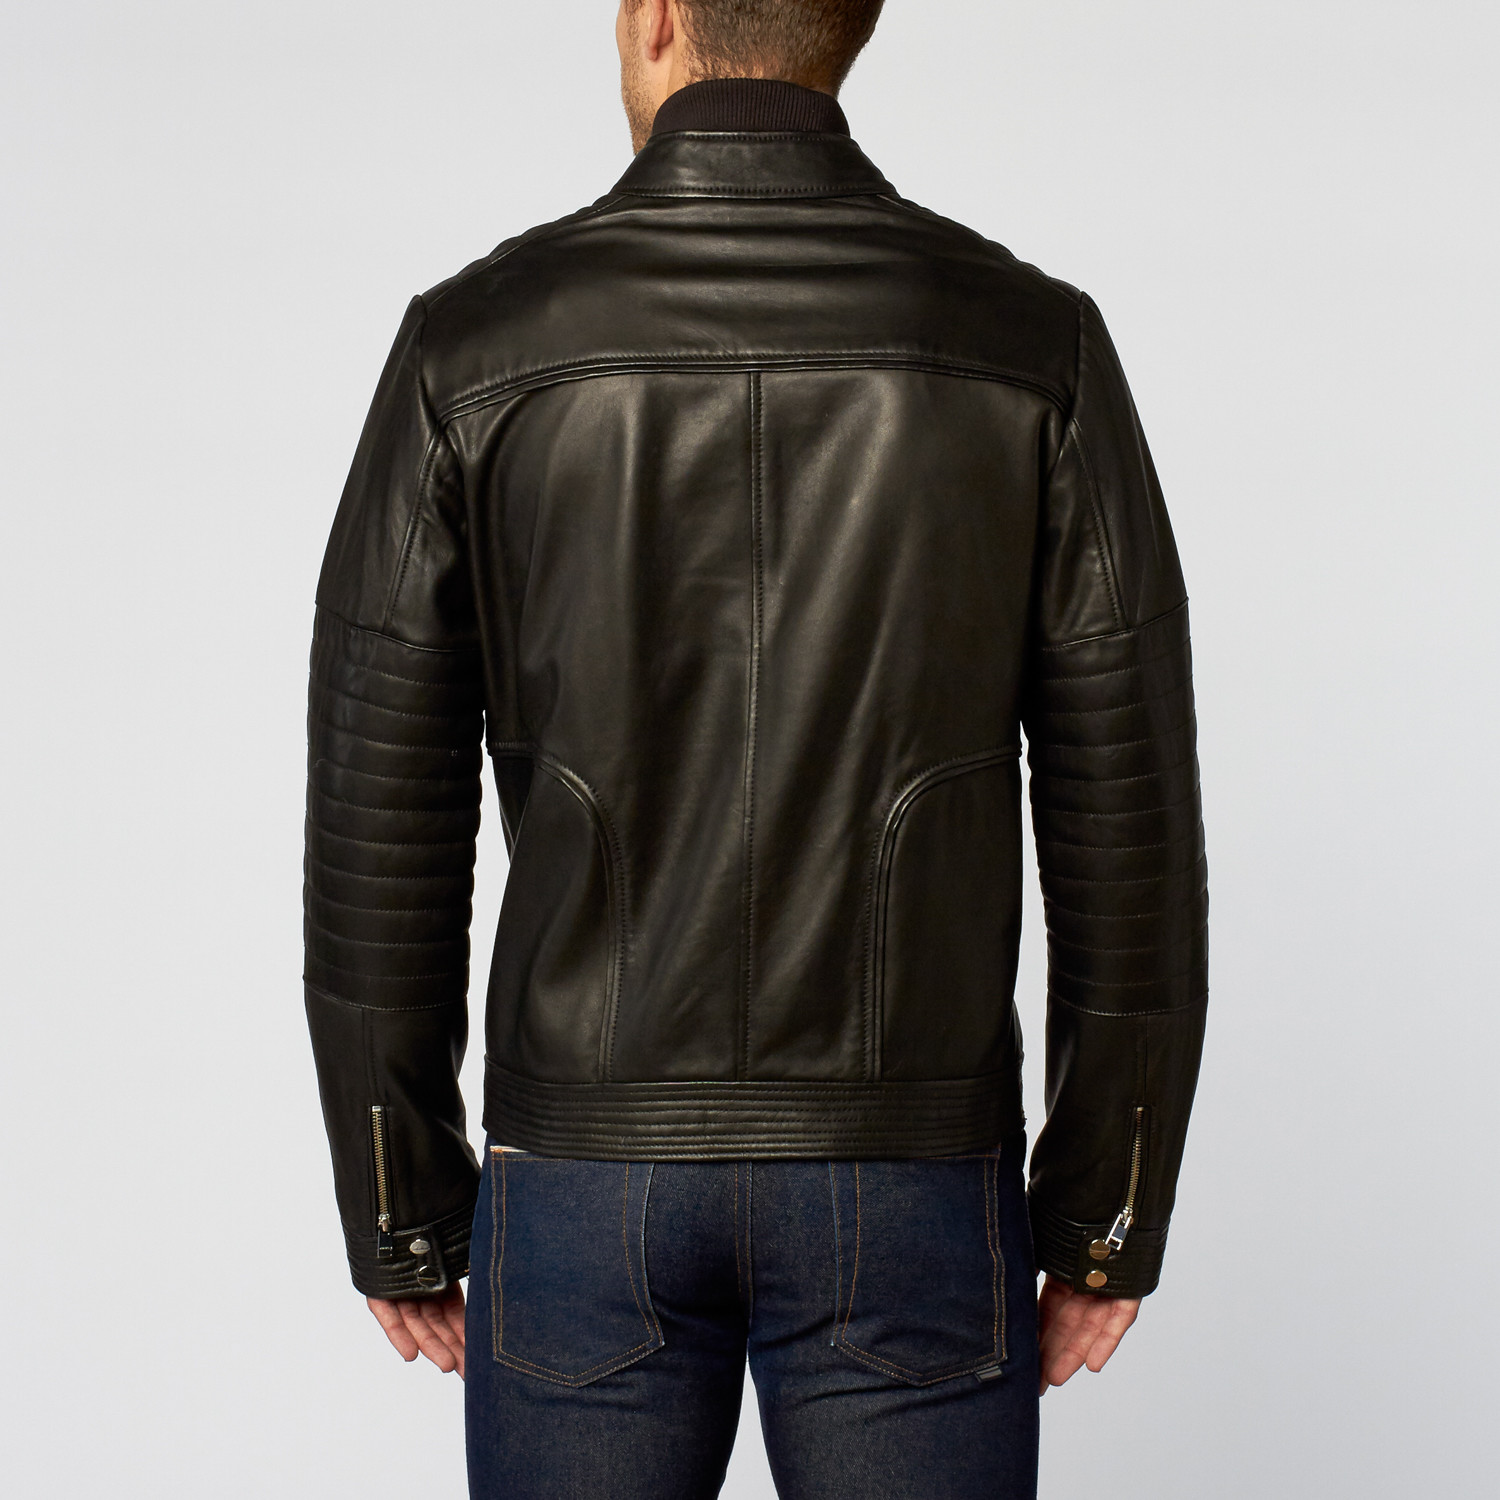 Loaded Chopper Leather Motorcycle Jacket // Black (XL) - LaMarque ...